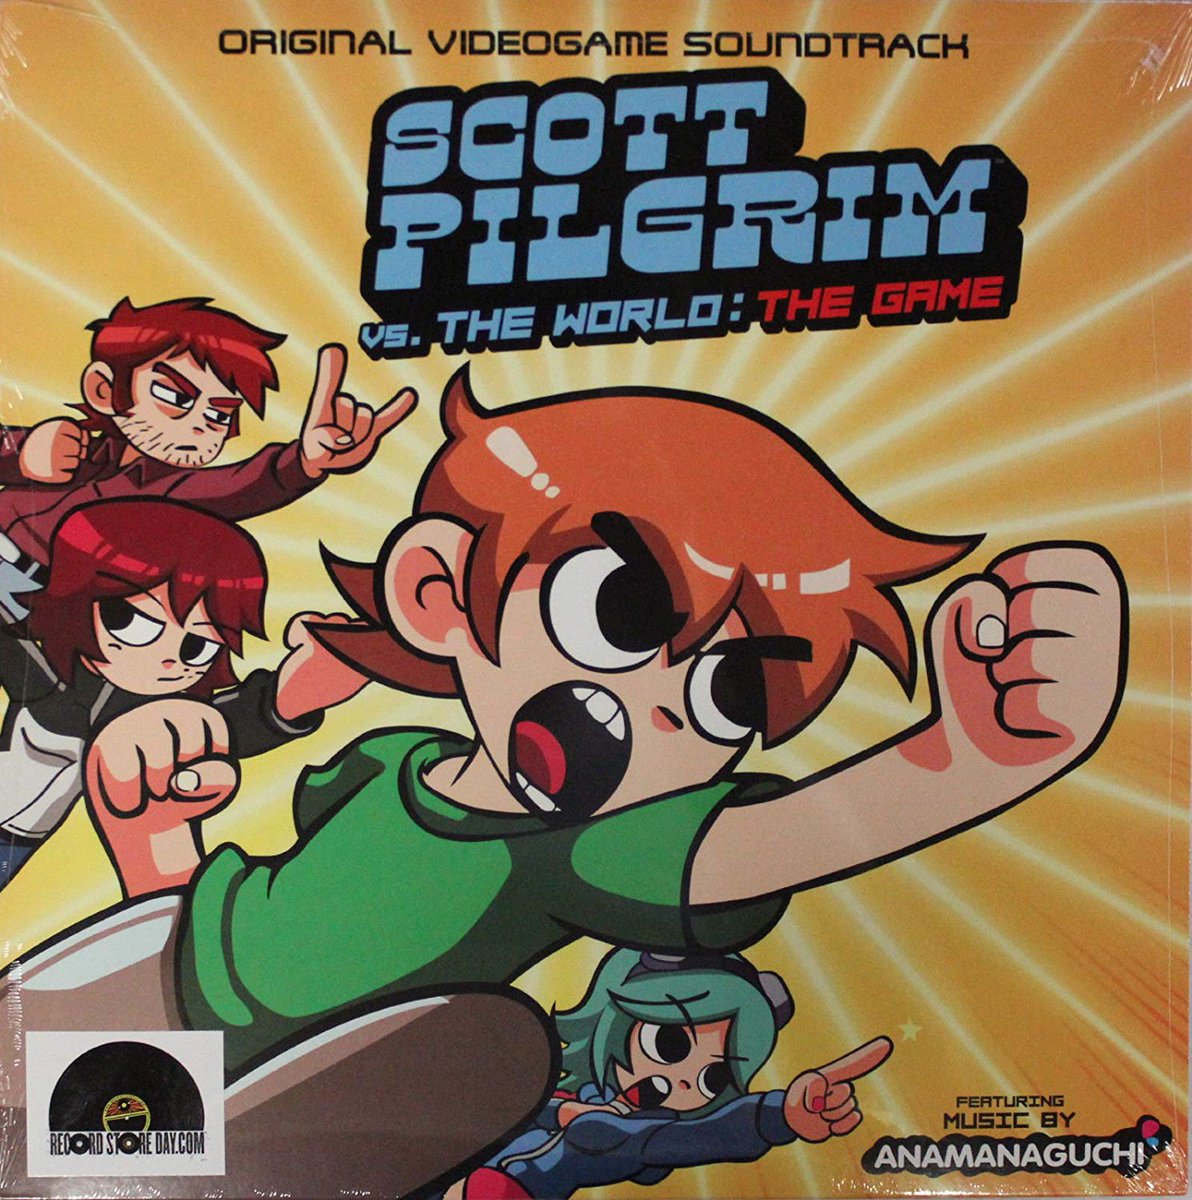 Scott Pilgrim vs. The World: The Game Original Videogame Soundtrack — AnamanaguchiIf you like Chiprock beat-em-up video game music, this is a must-have.